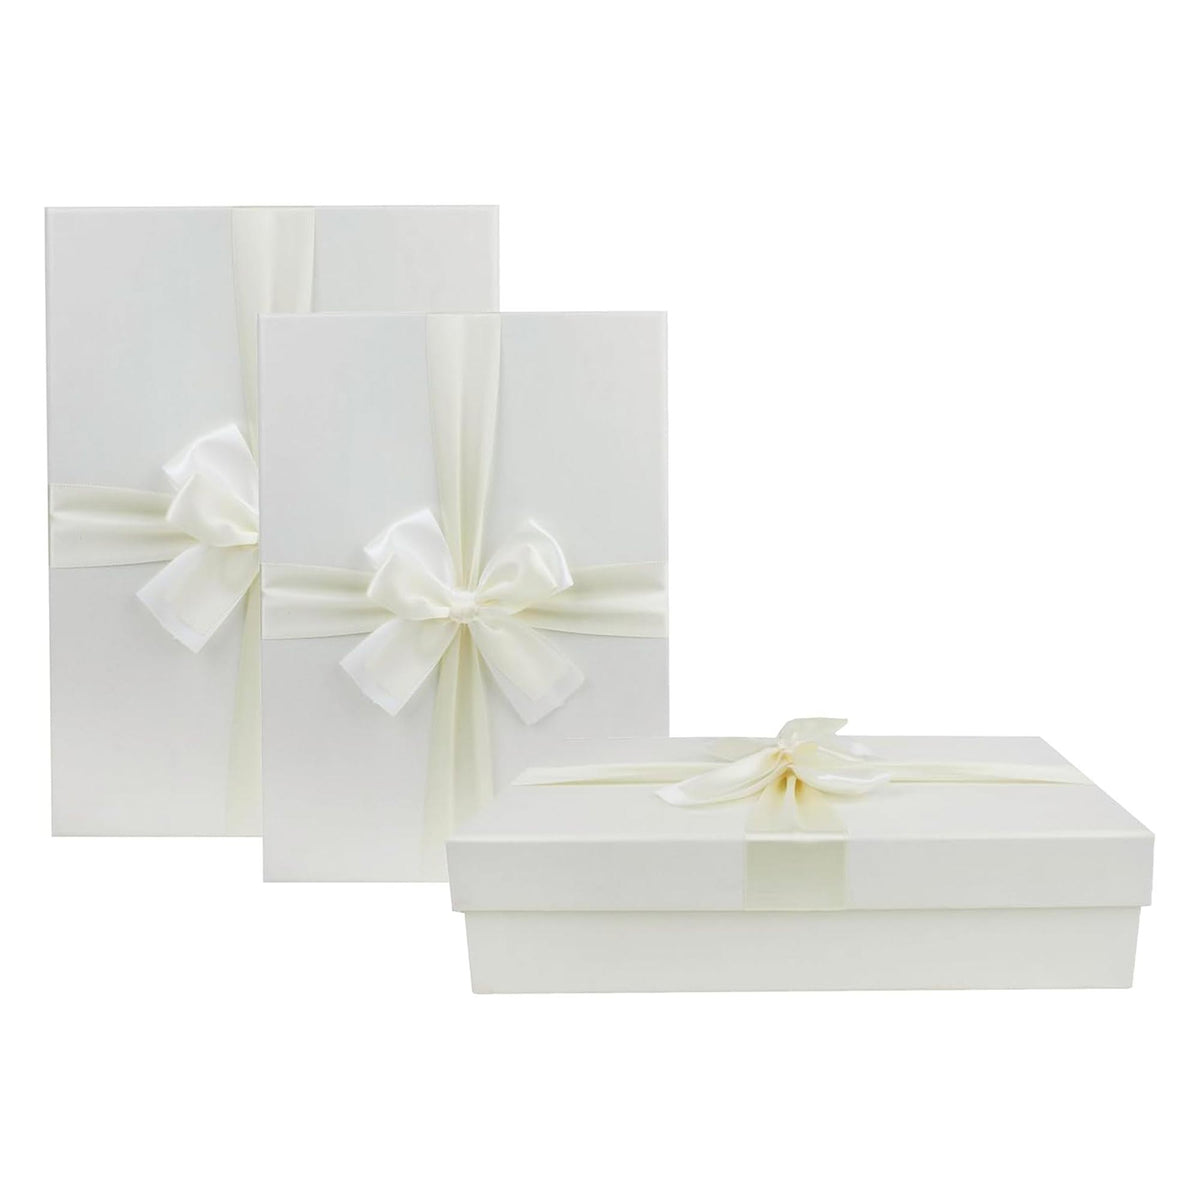 Set of 3 Ivory Gift Boxes with Cream Satin Ribbon (Sizes Available)